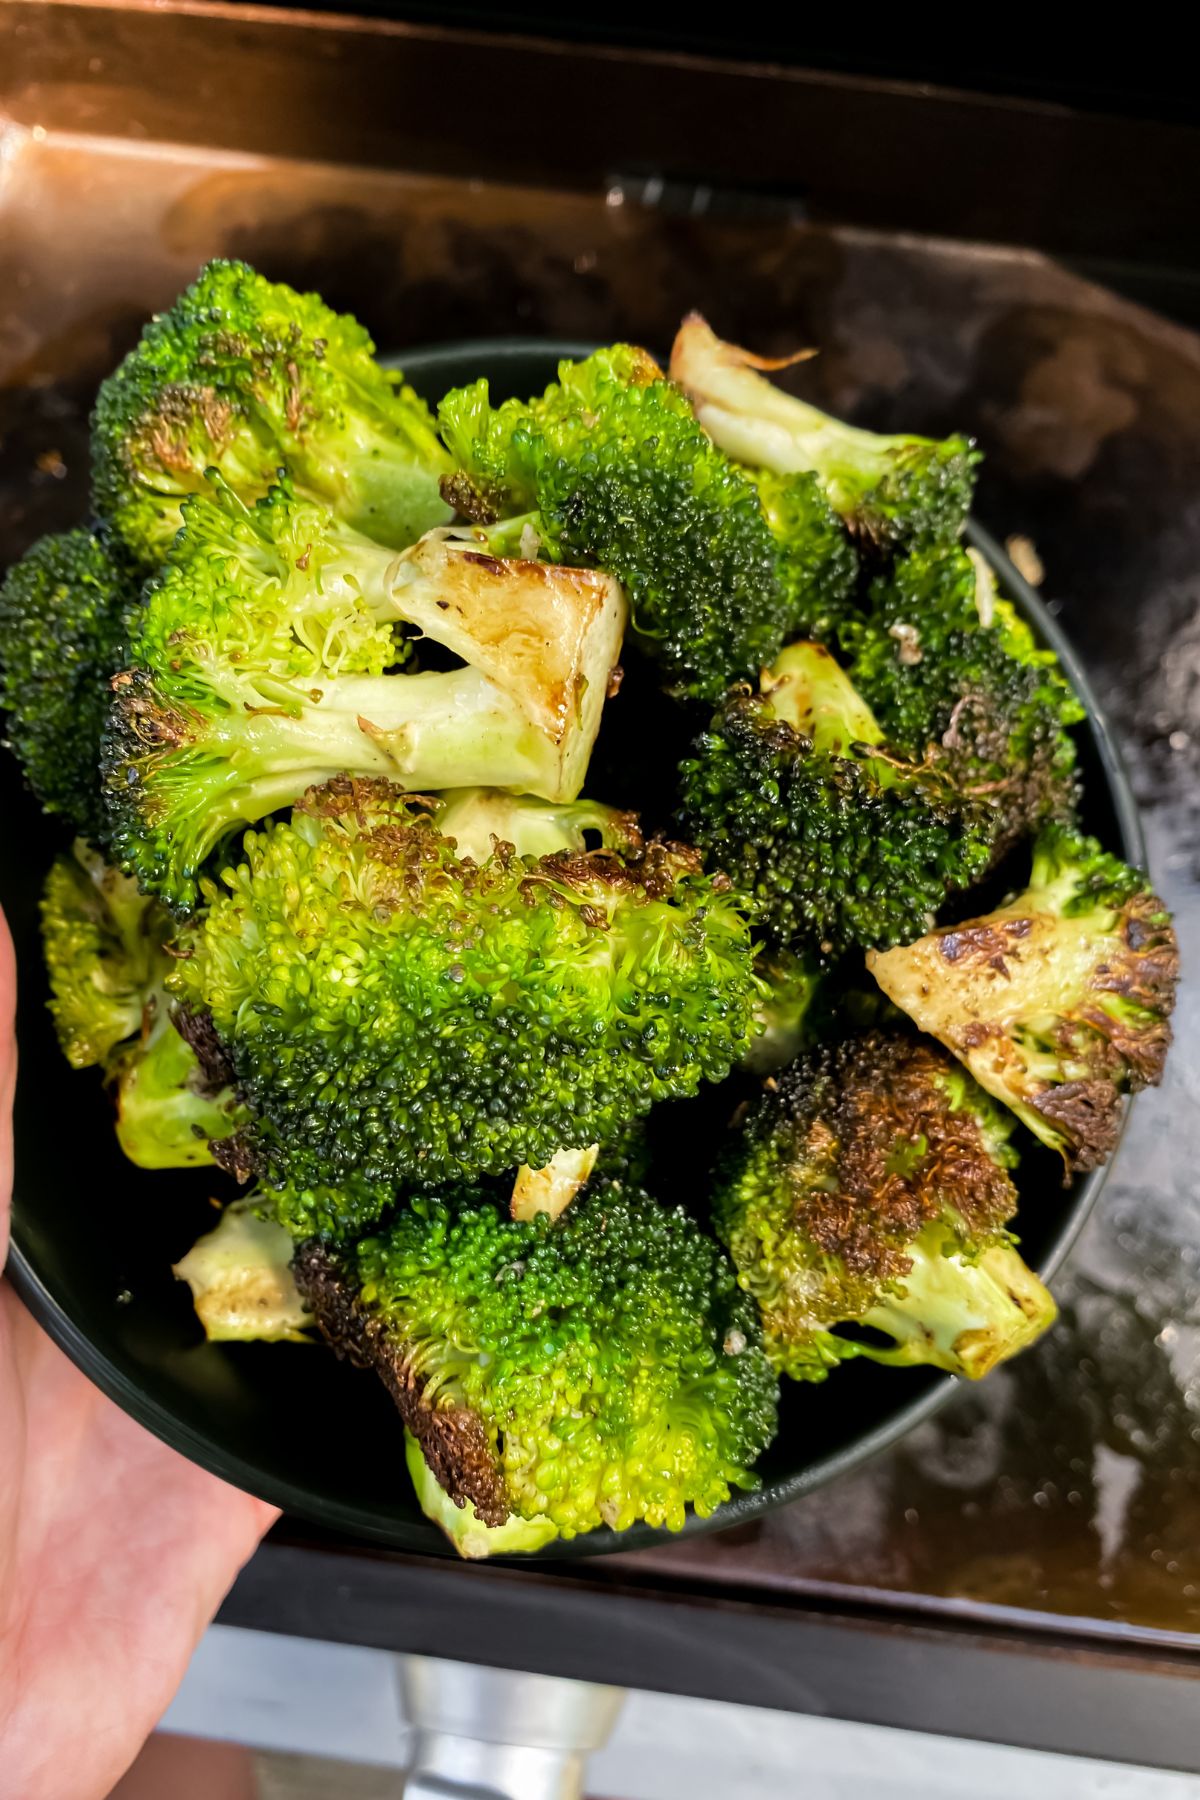 cooked broccoli in a black bowl